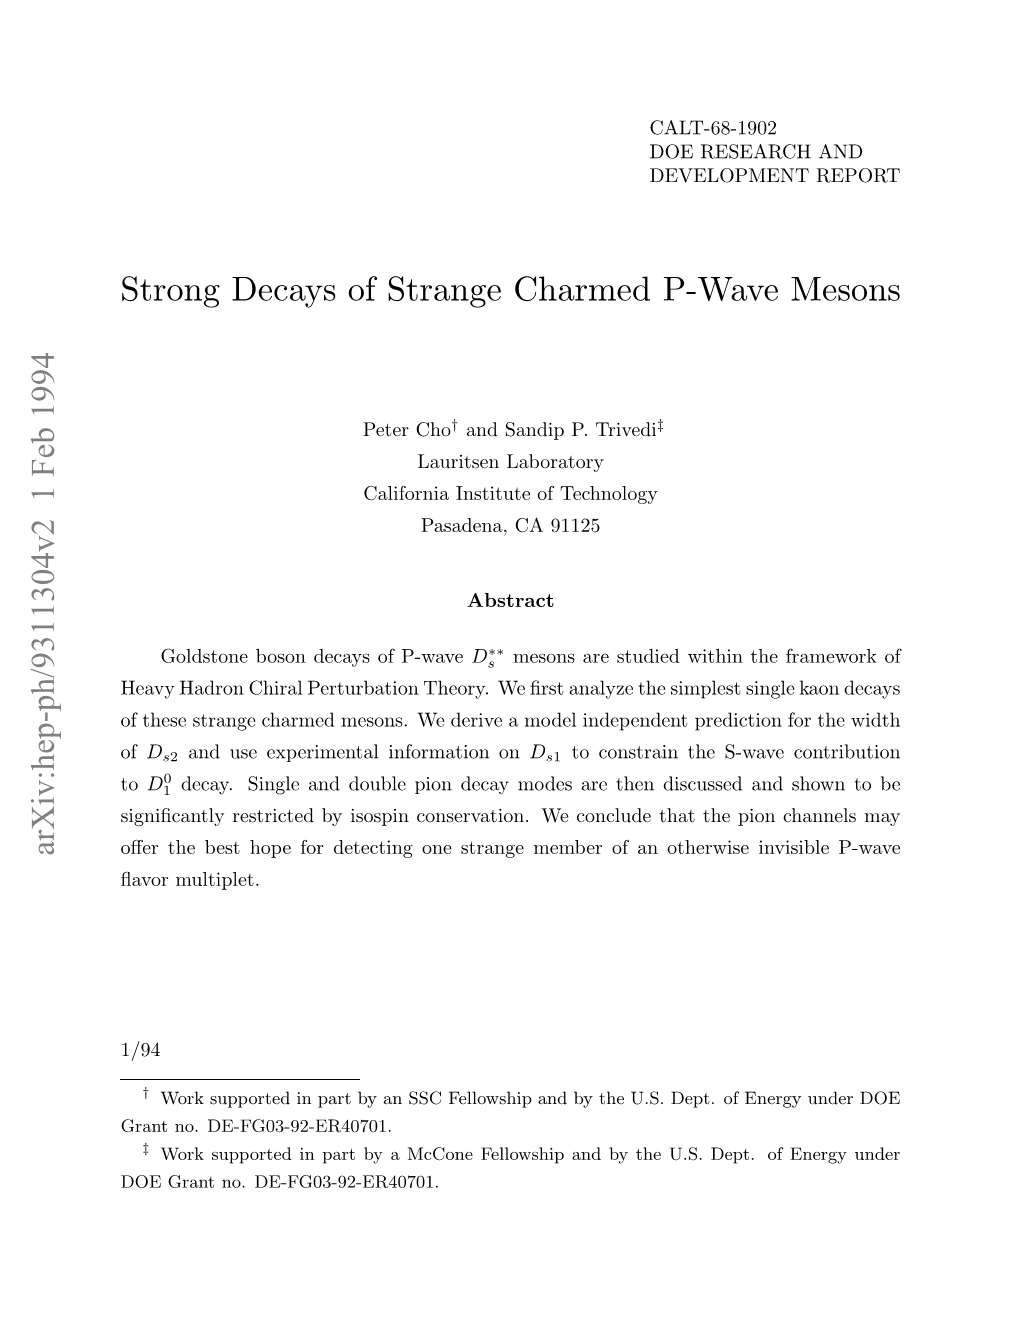 Strong Decays of Strange Charmed P-Wave Mesons